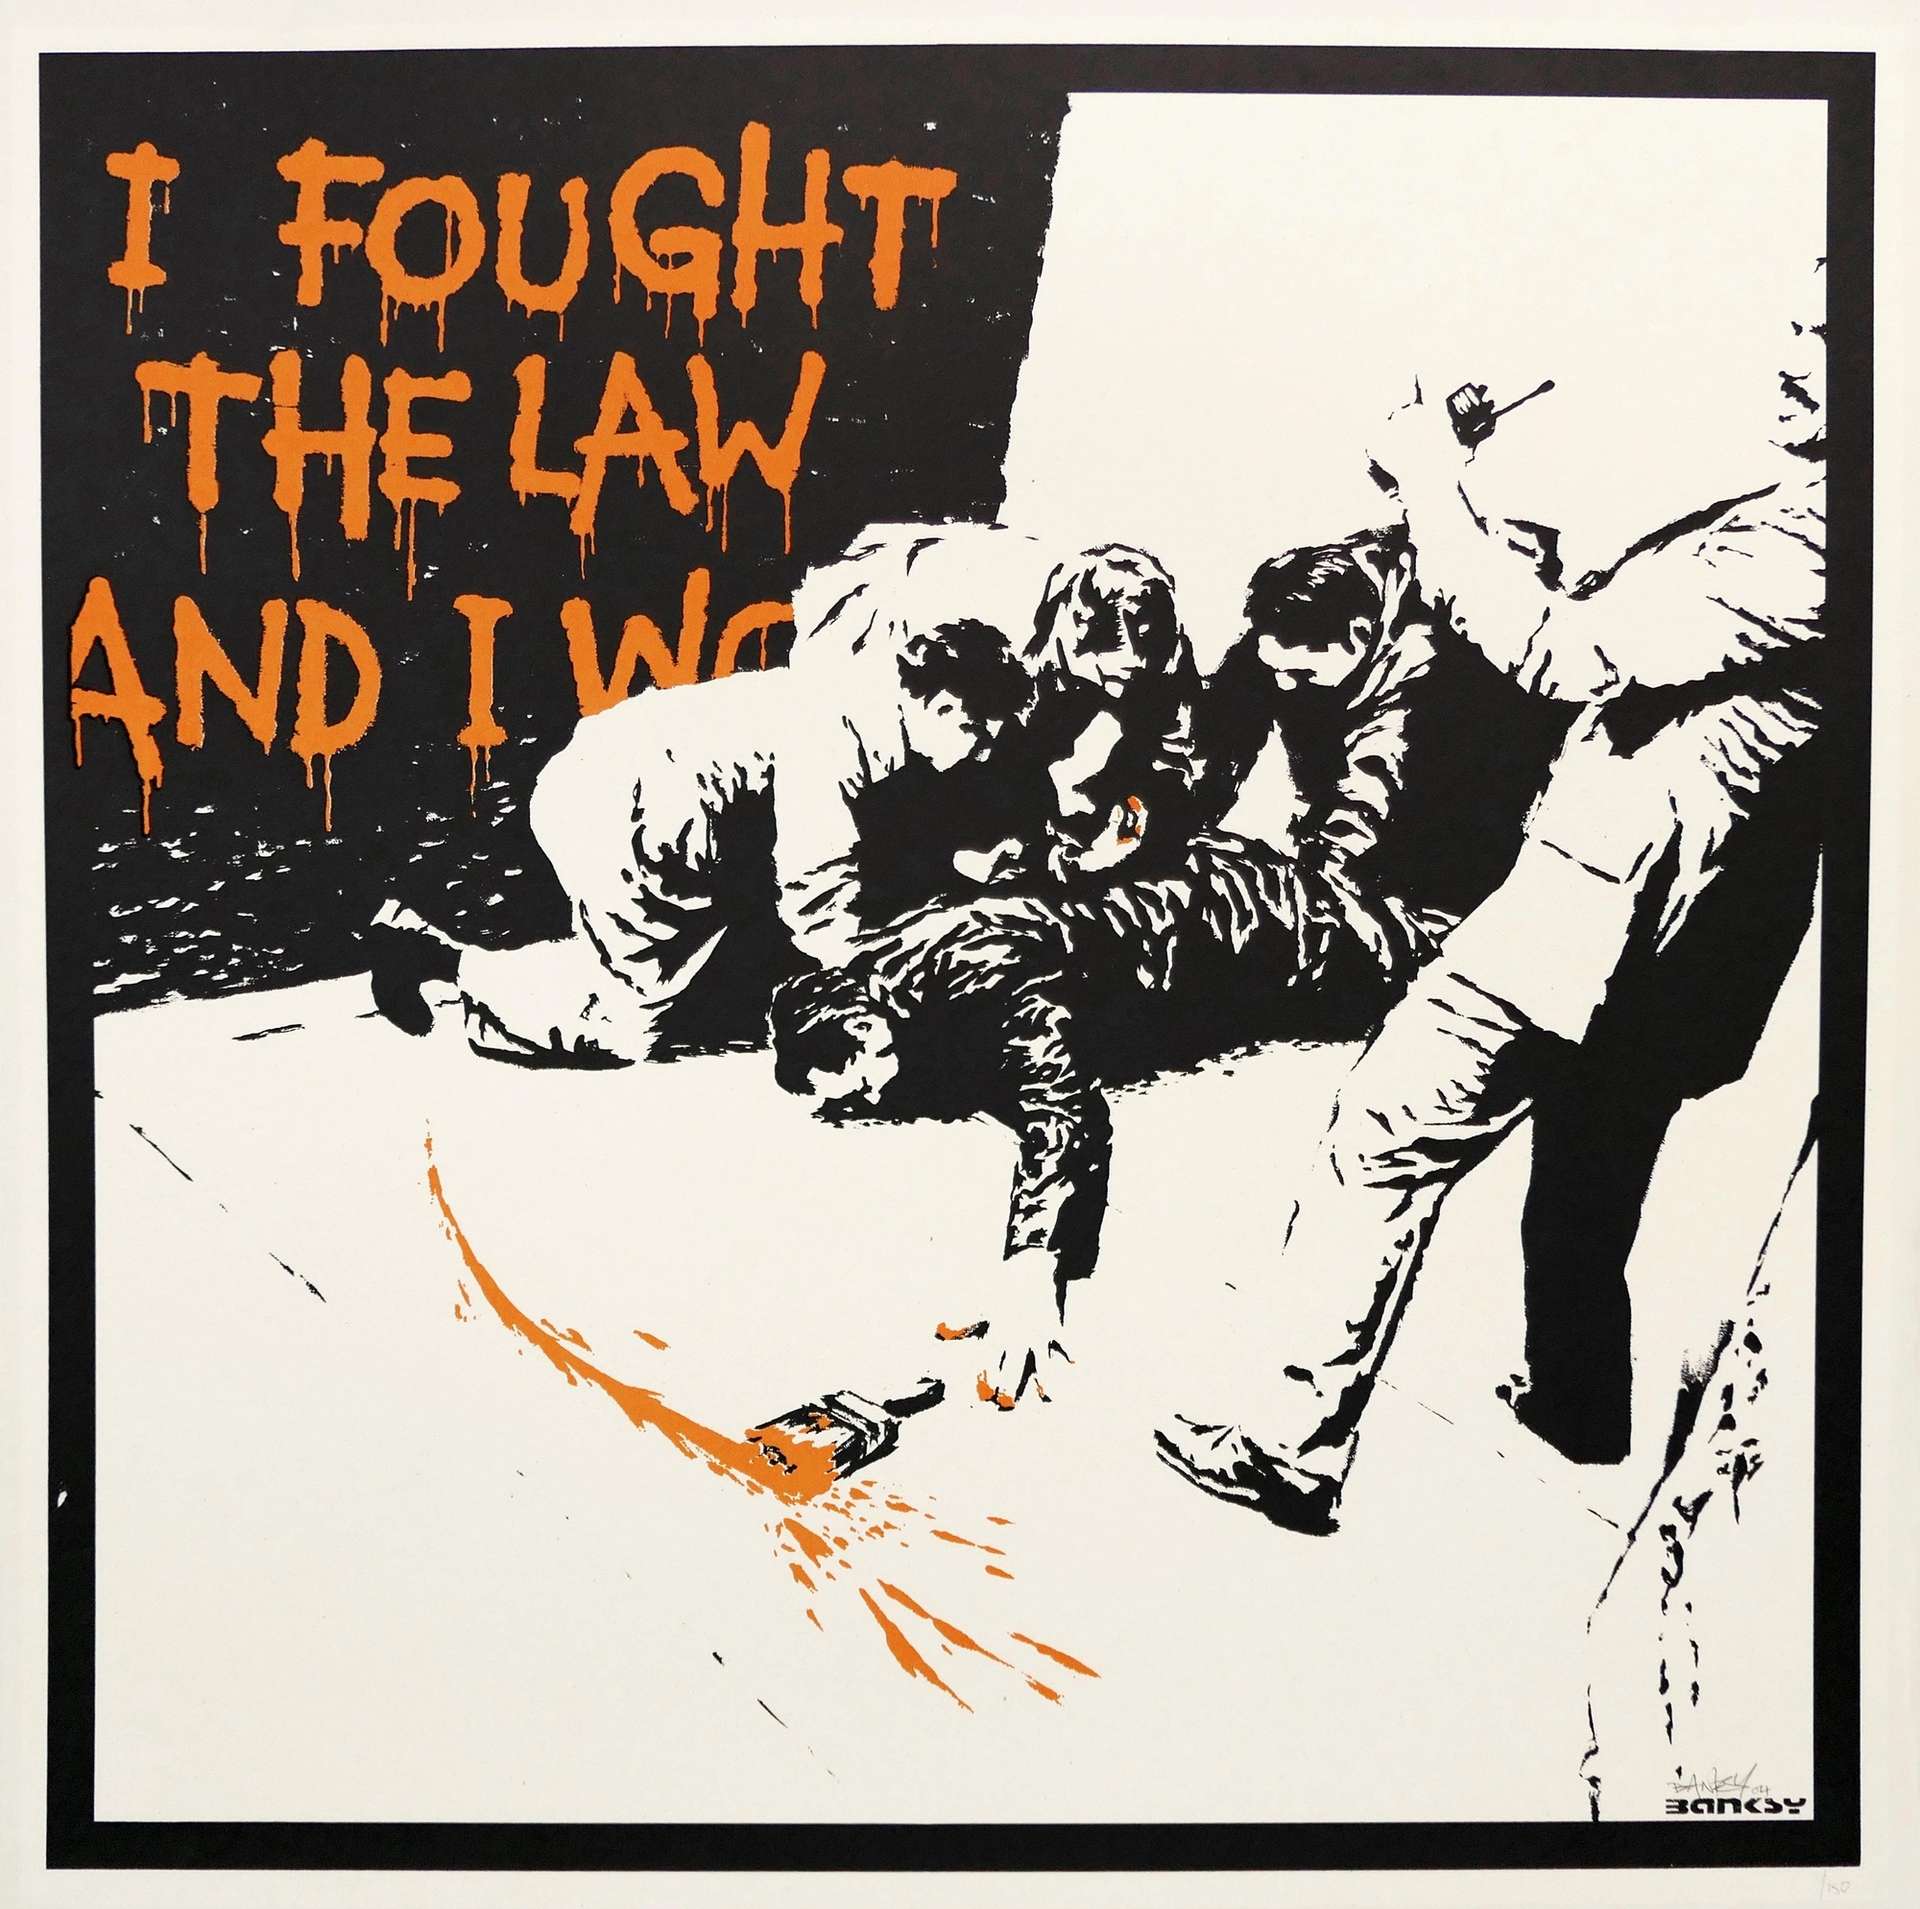 I Fought The Law by Banksy